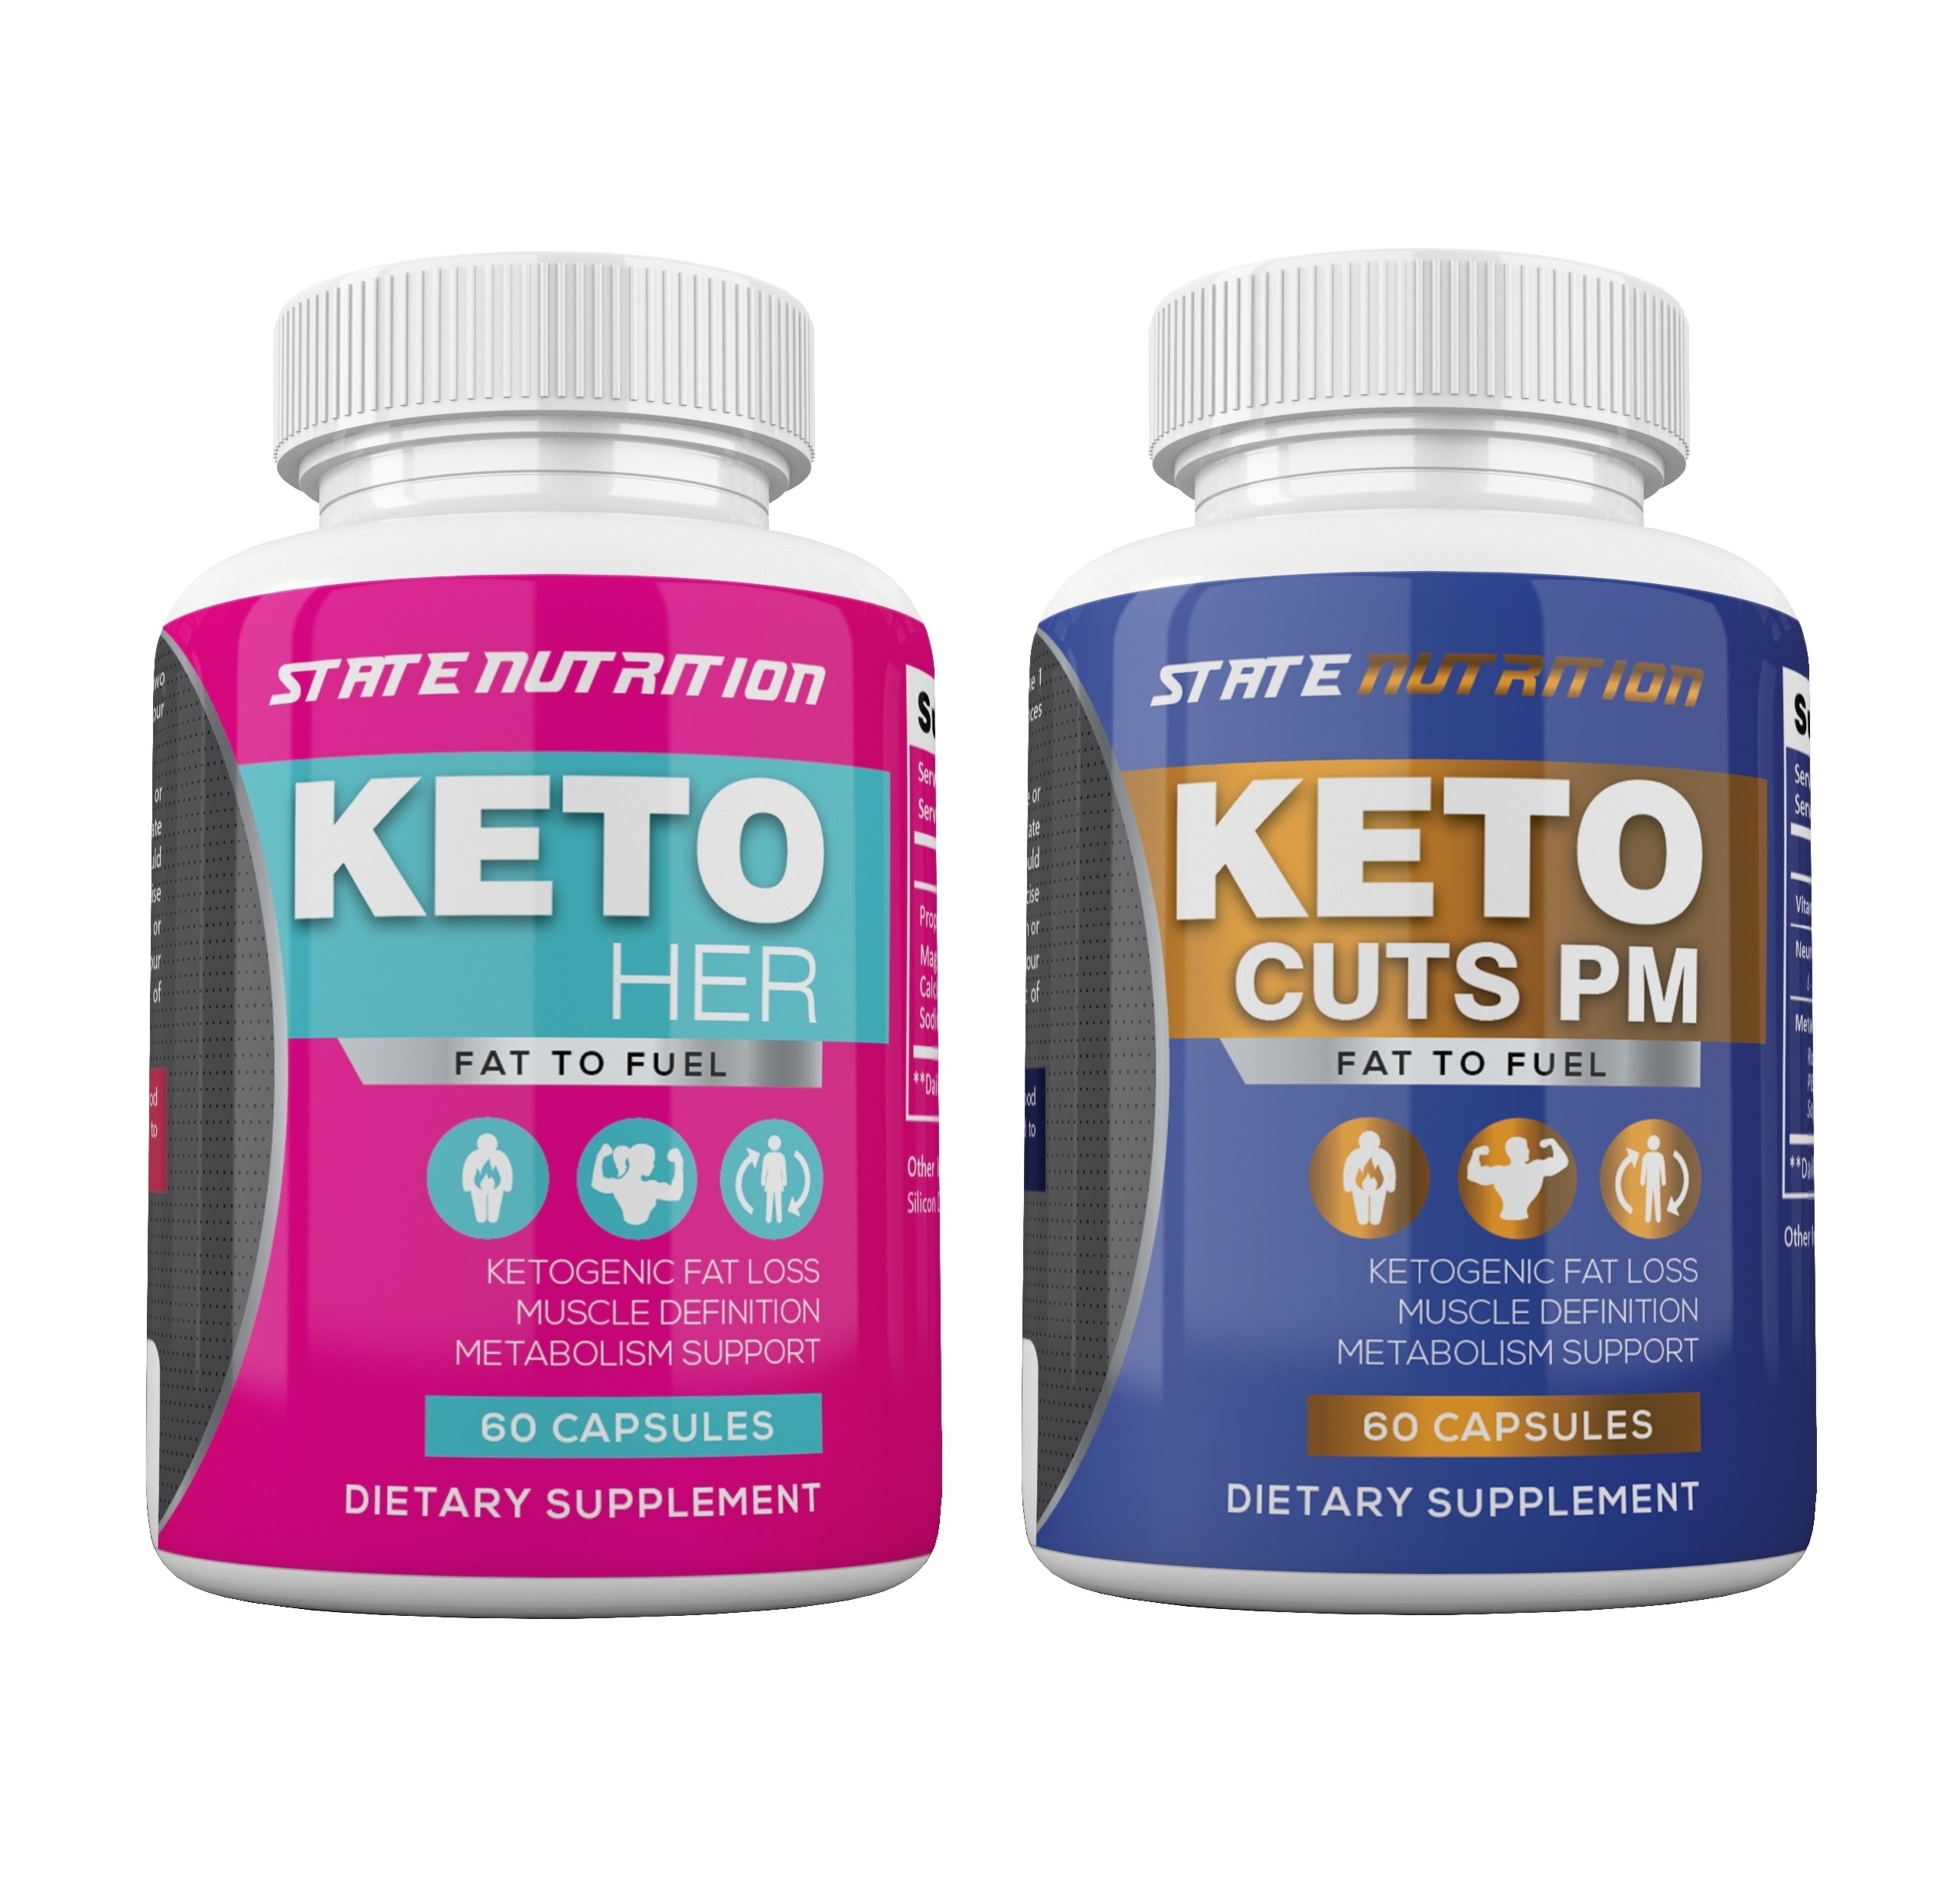 Keto Diet Pills for Women, Ketogenic Supplements Keto Her and Keto Cuts ...